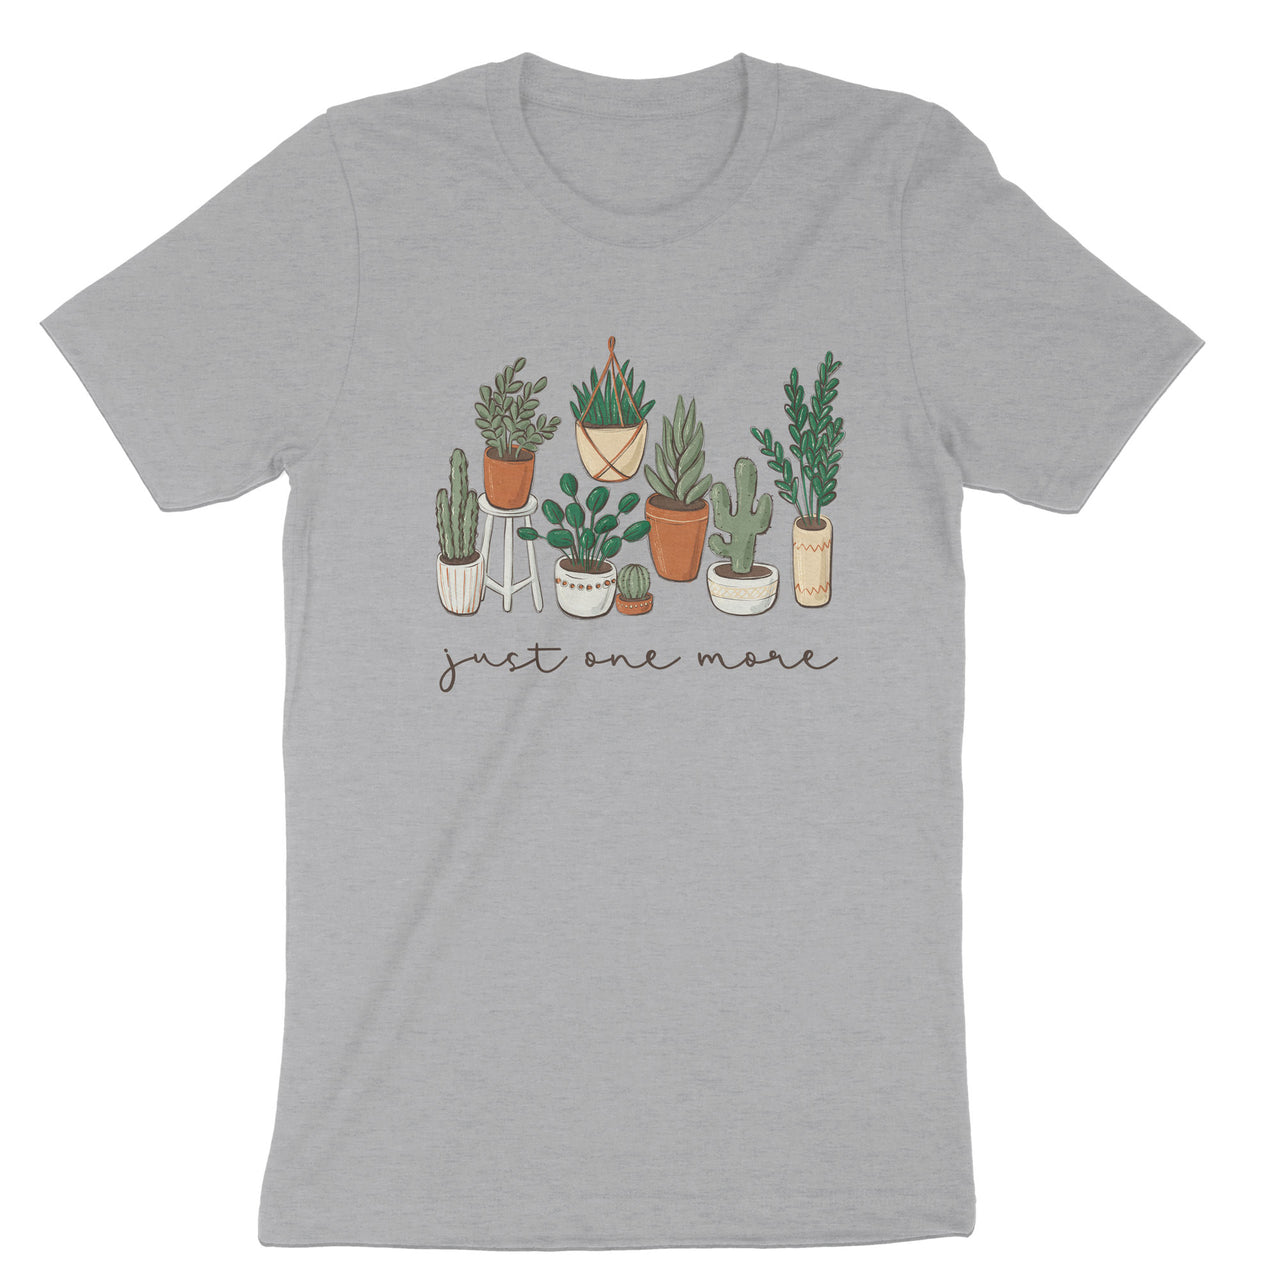 Plant LoverT-Shirt, Just One More Plant Tee Shirt